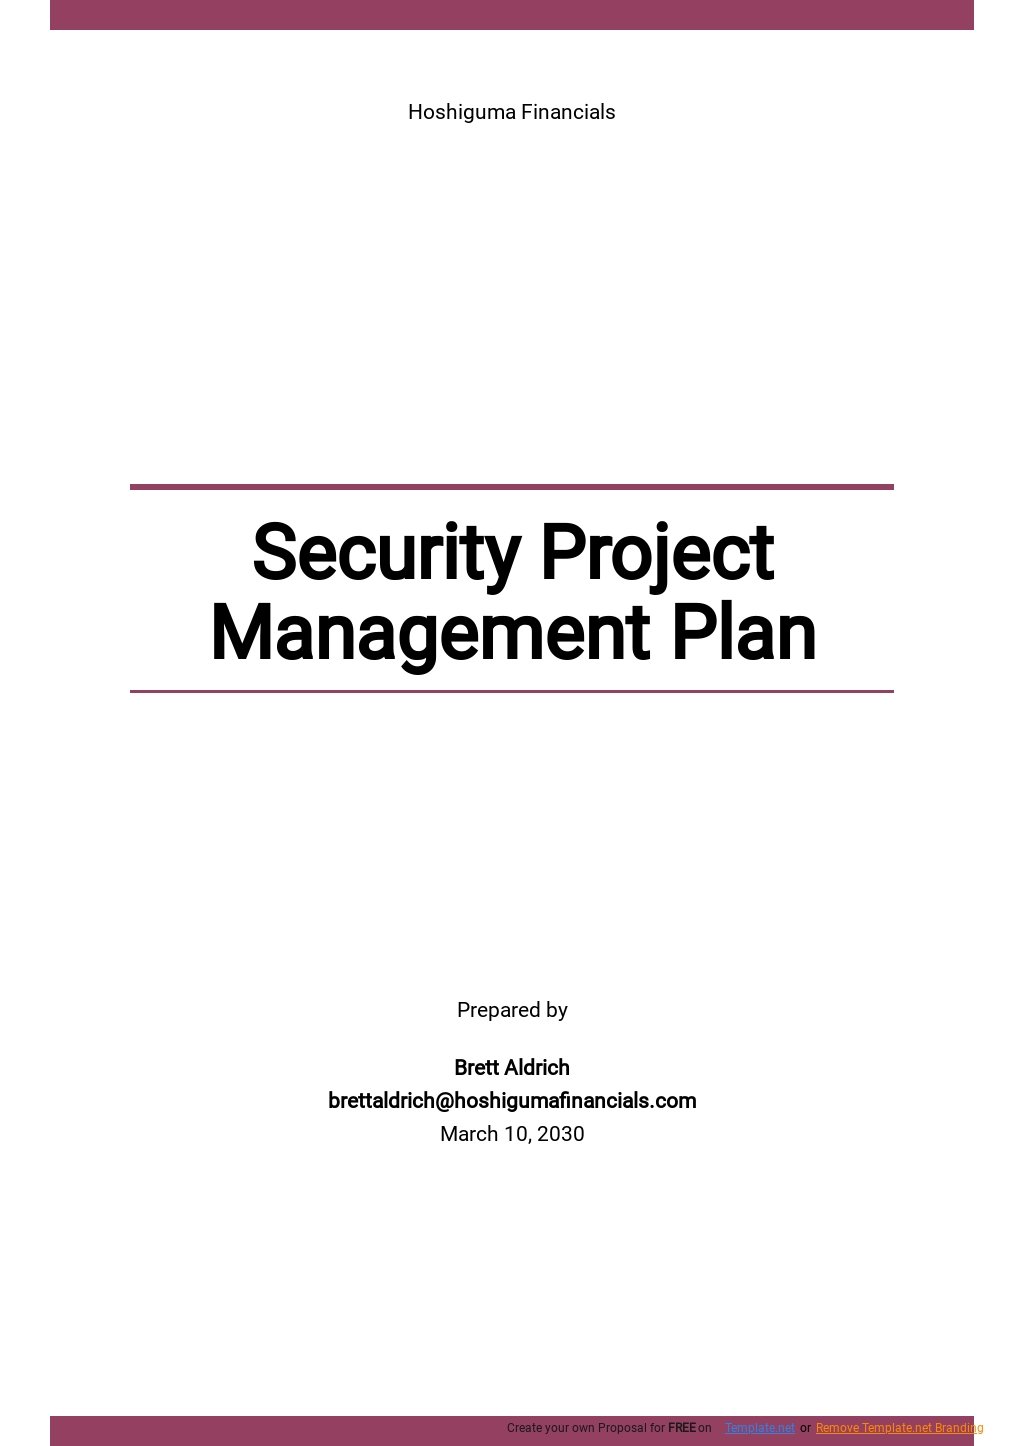 Security Project Management Plan Template